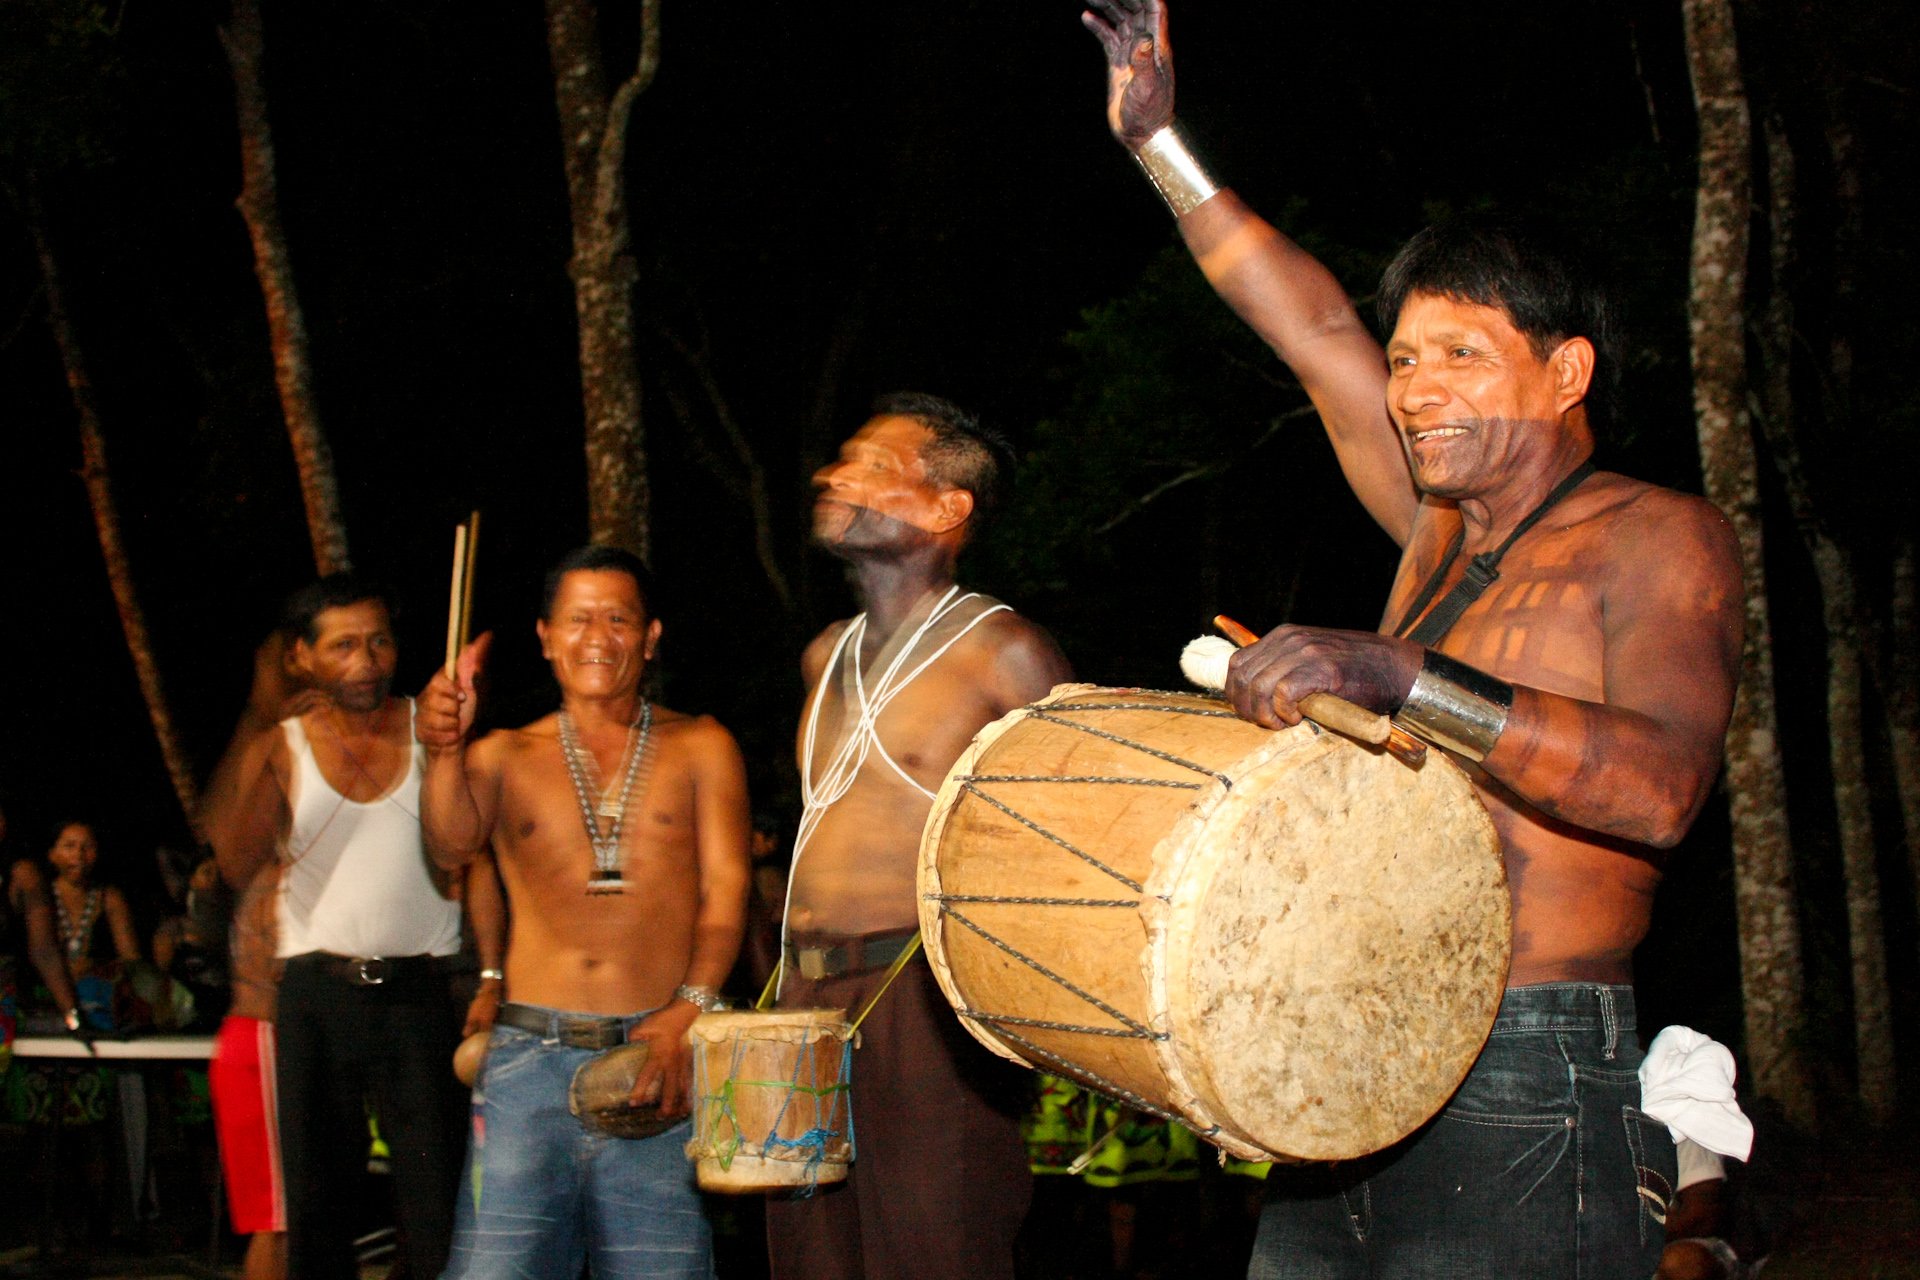 Perspectives from Rural & Indigenous Partner Communities in Panama